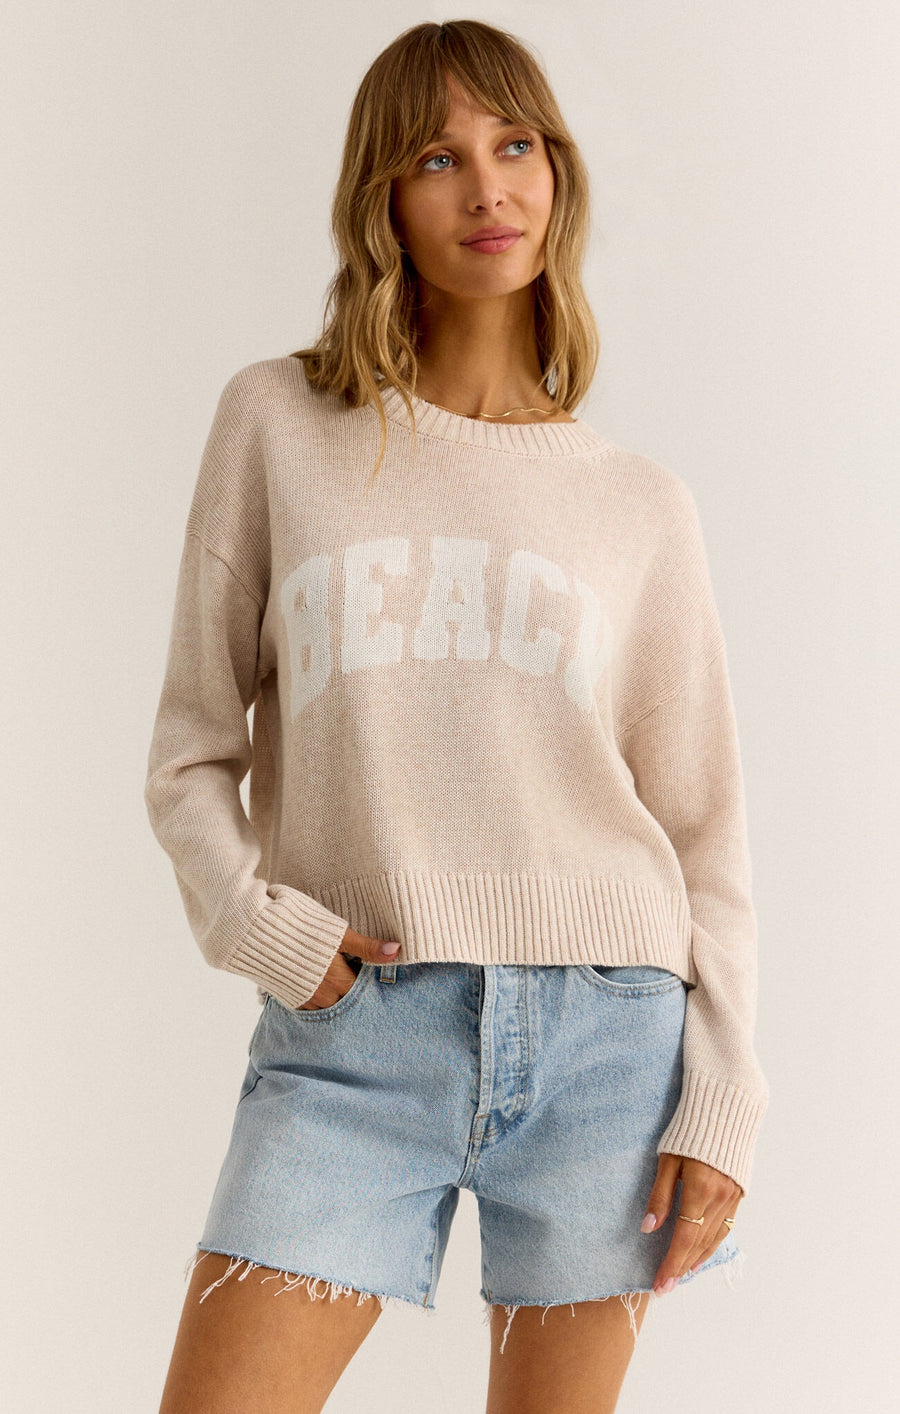 Featuring a slight crop long sleeve light weight sweater in the color light oat meal heather 